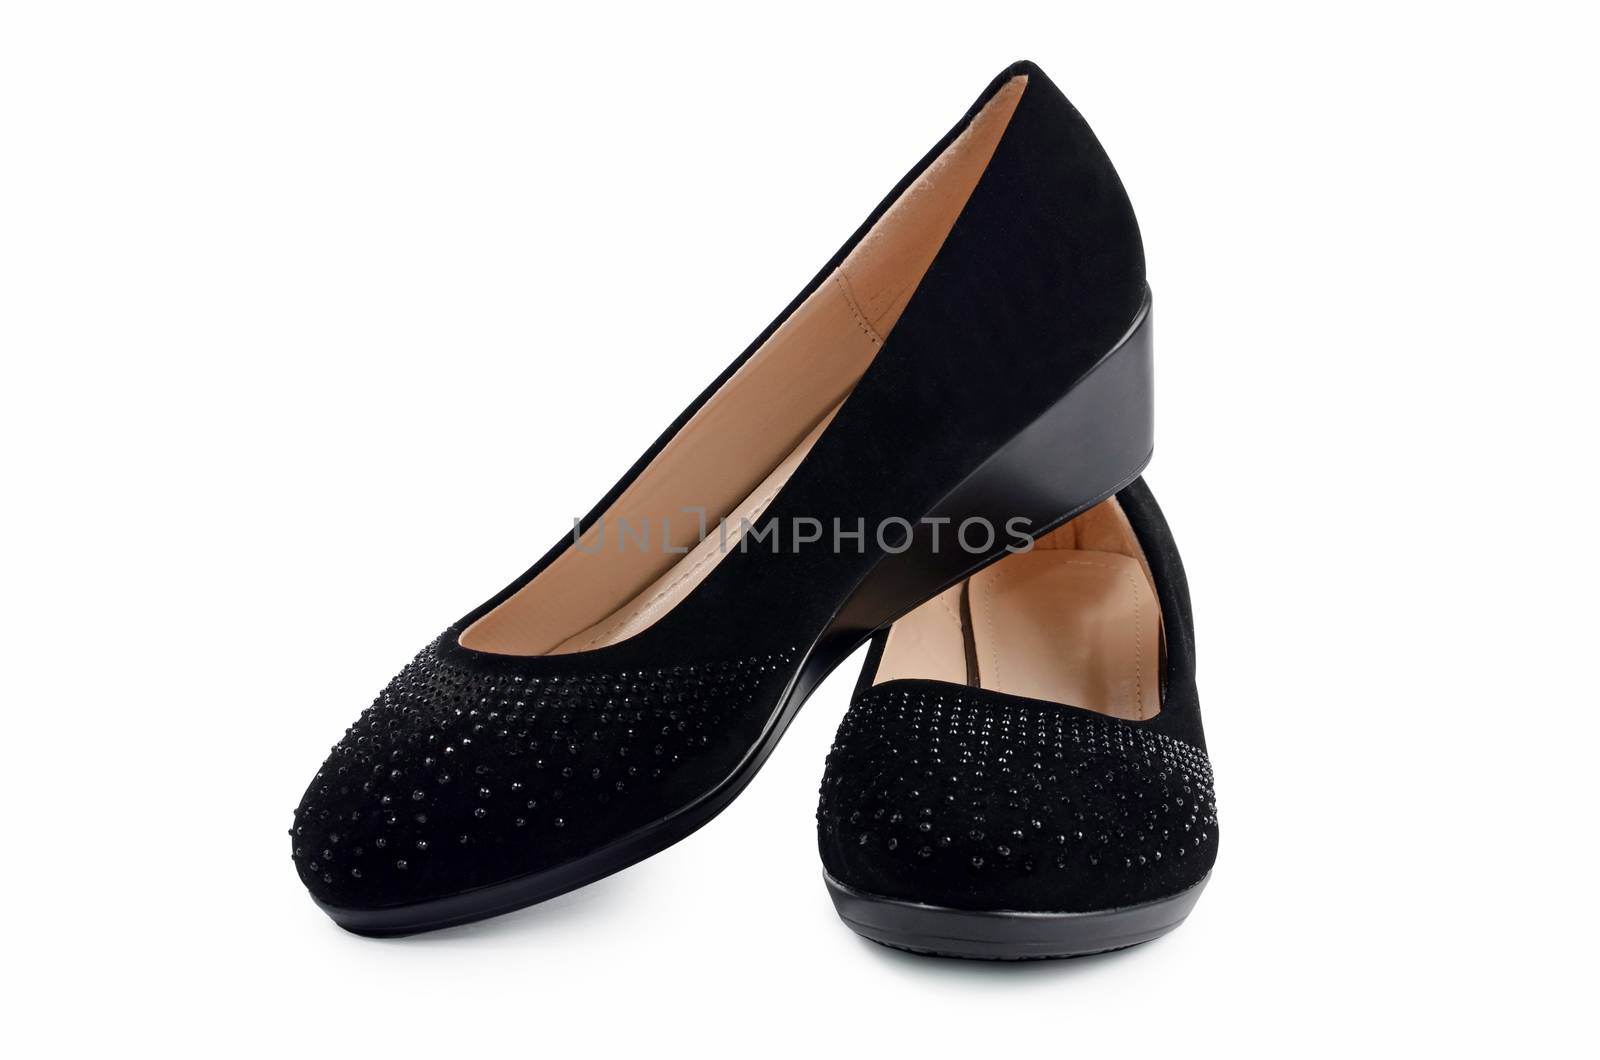 Women's black shoes isolated on white background